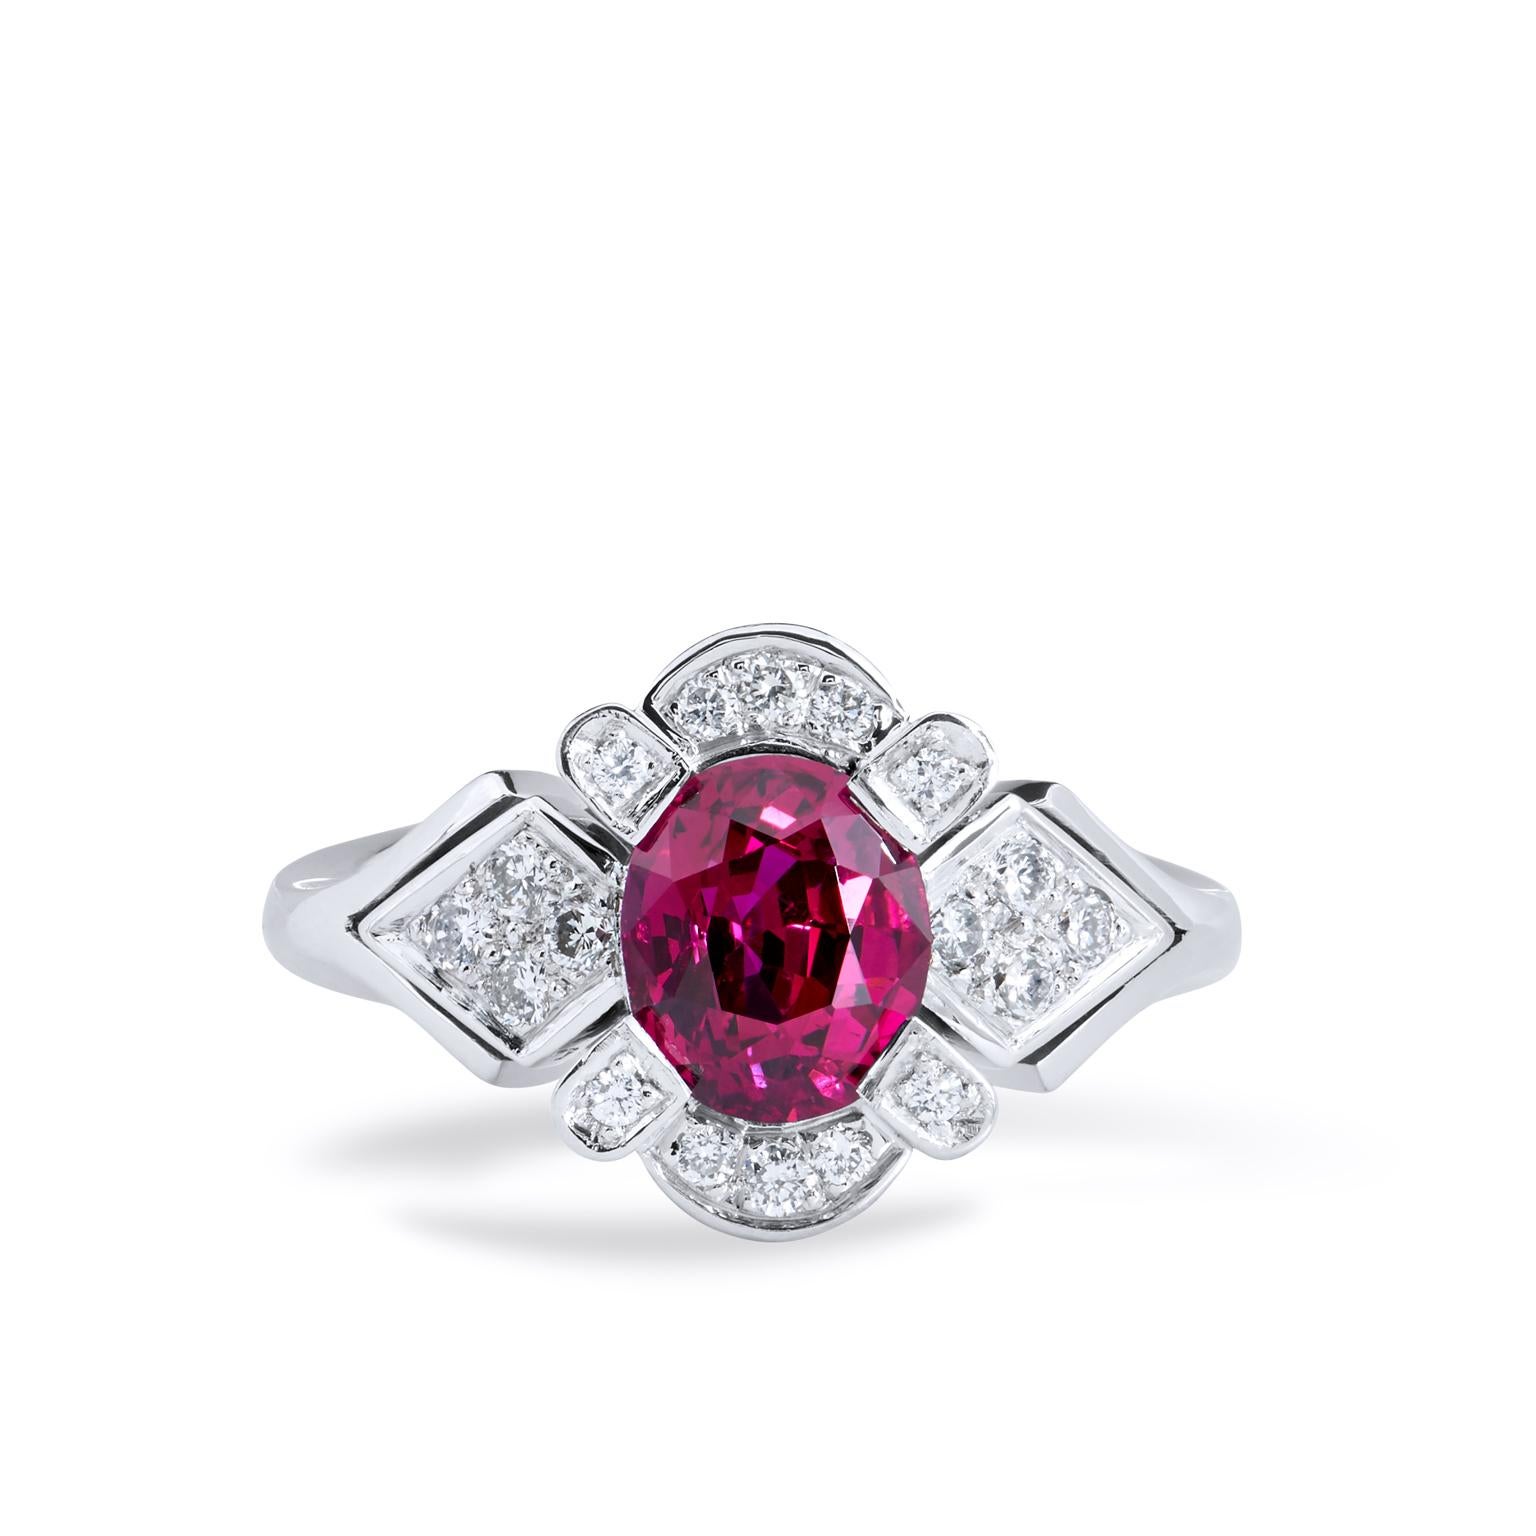 Handmade GIA Certified Thai Oval Ruby Diamond Pave Platinum Ring For Sale 1